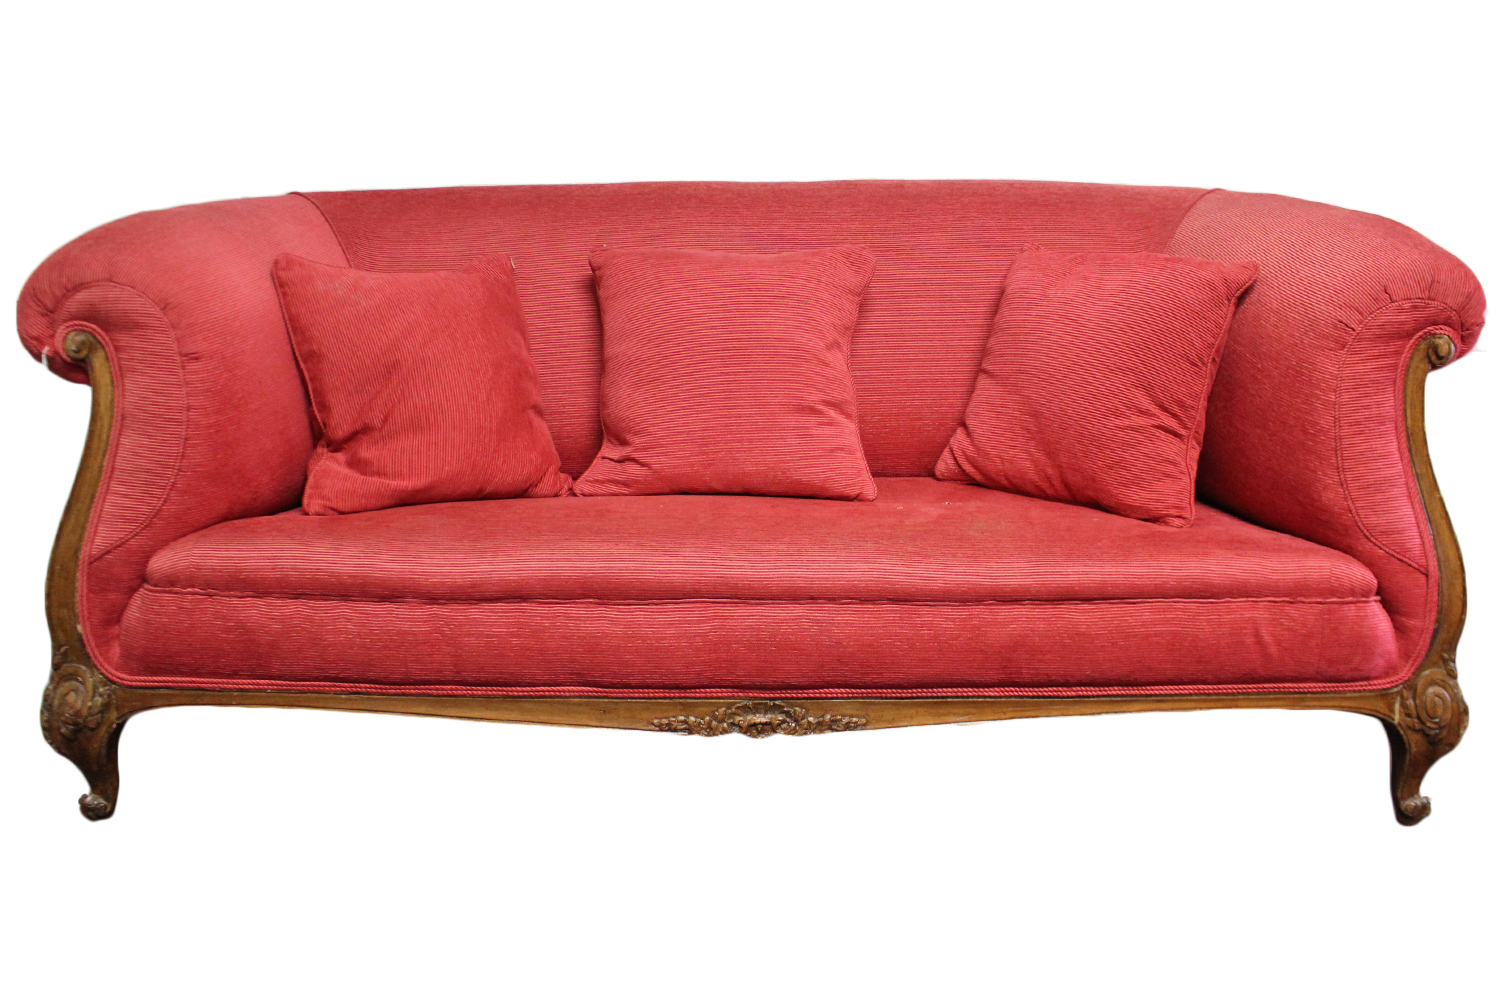 A 19th century carved walnut-frame Chesterfield type three-seater sofa, upholstered pink corduroy,